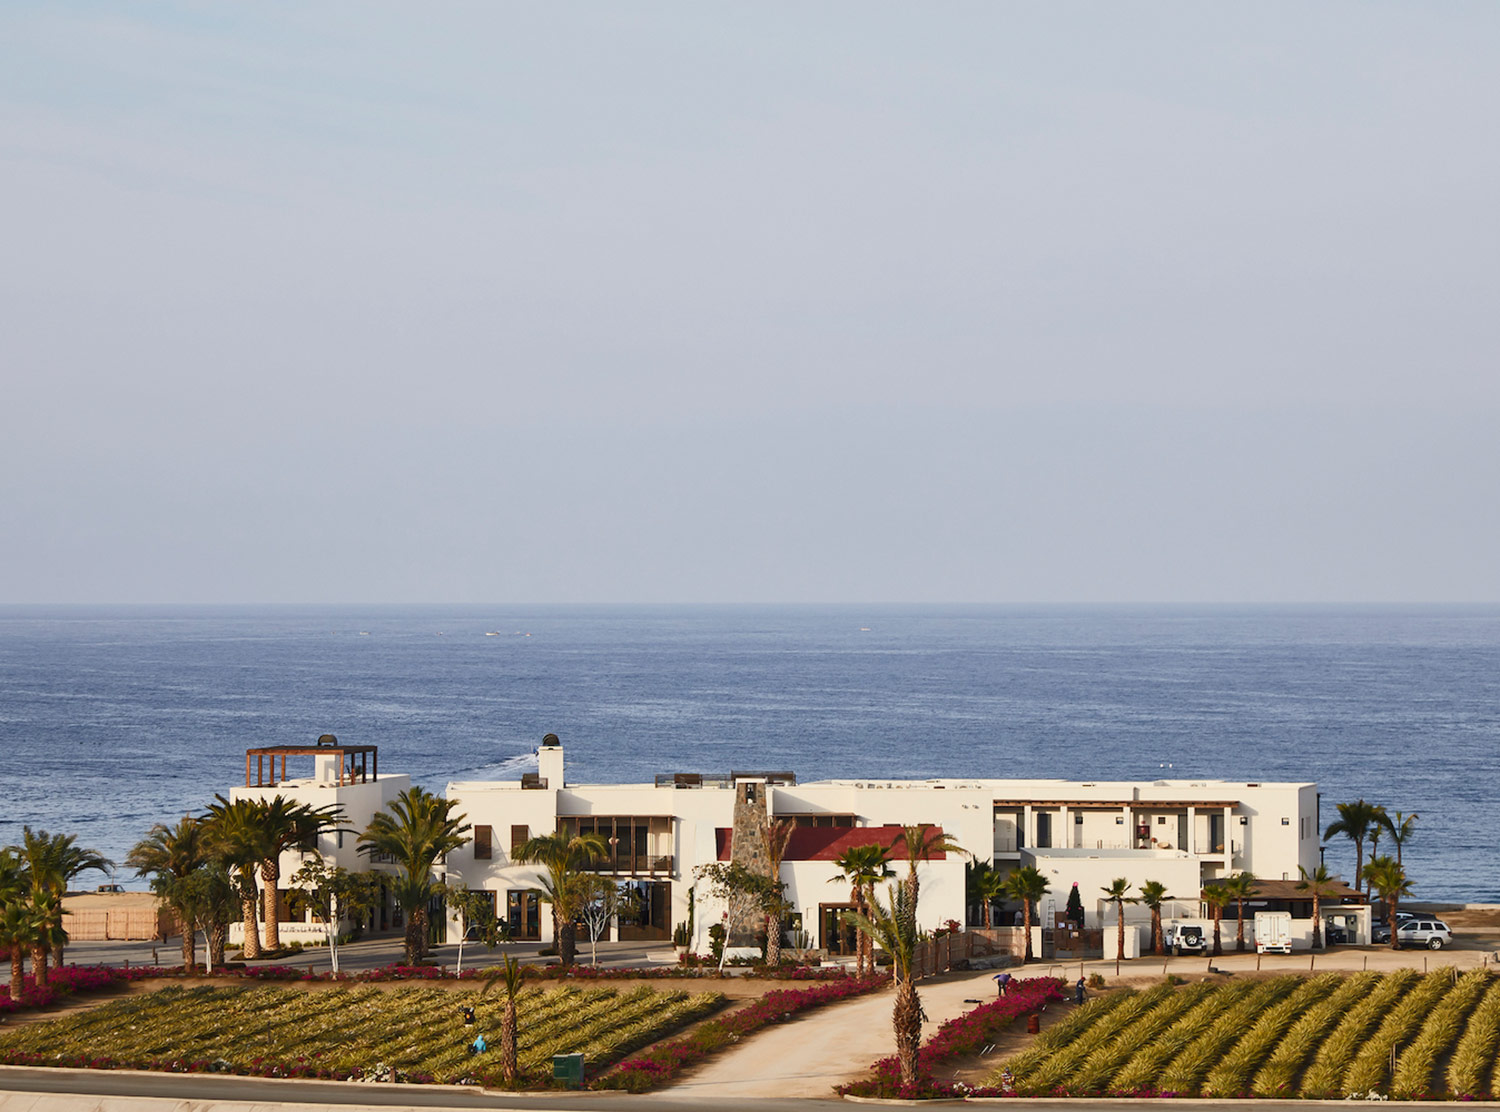 Hotel San Cristóbal sits on the Pacific side of Todos Santos, right along the Tropic of Cancer